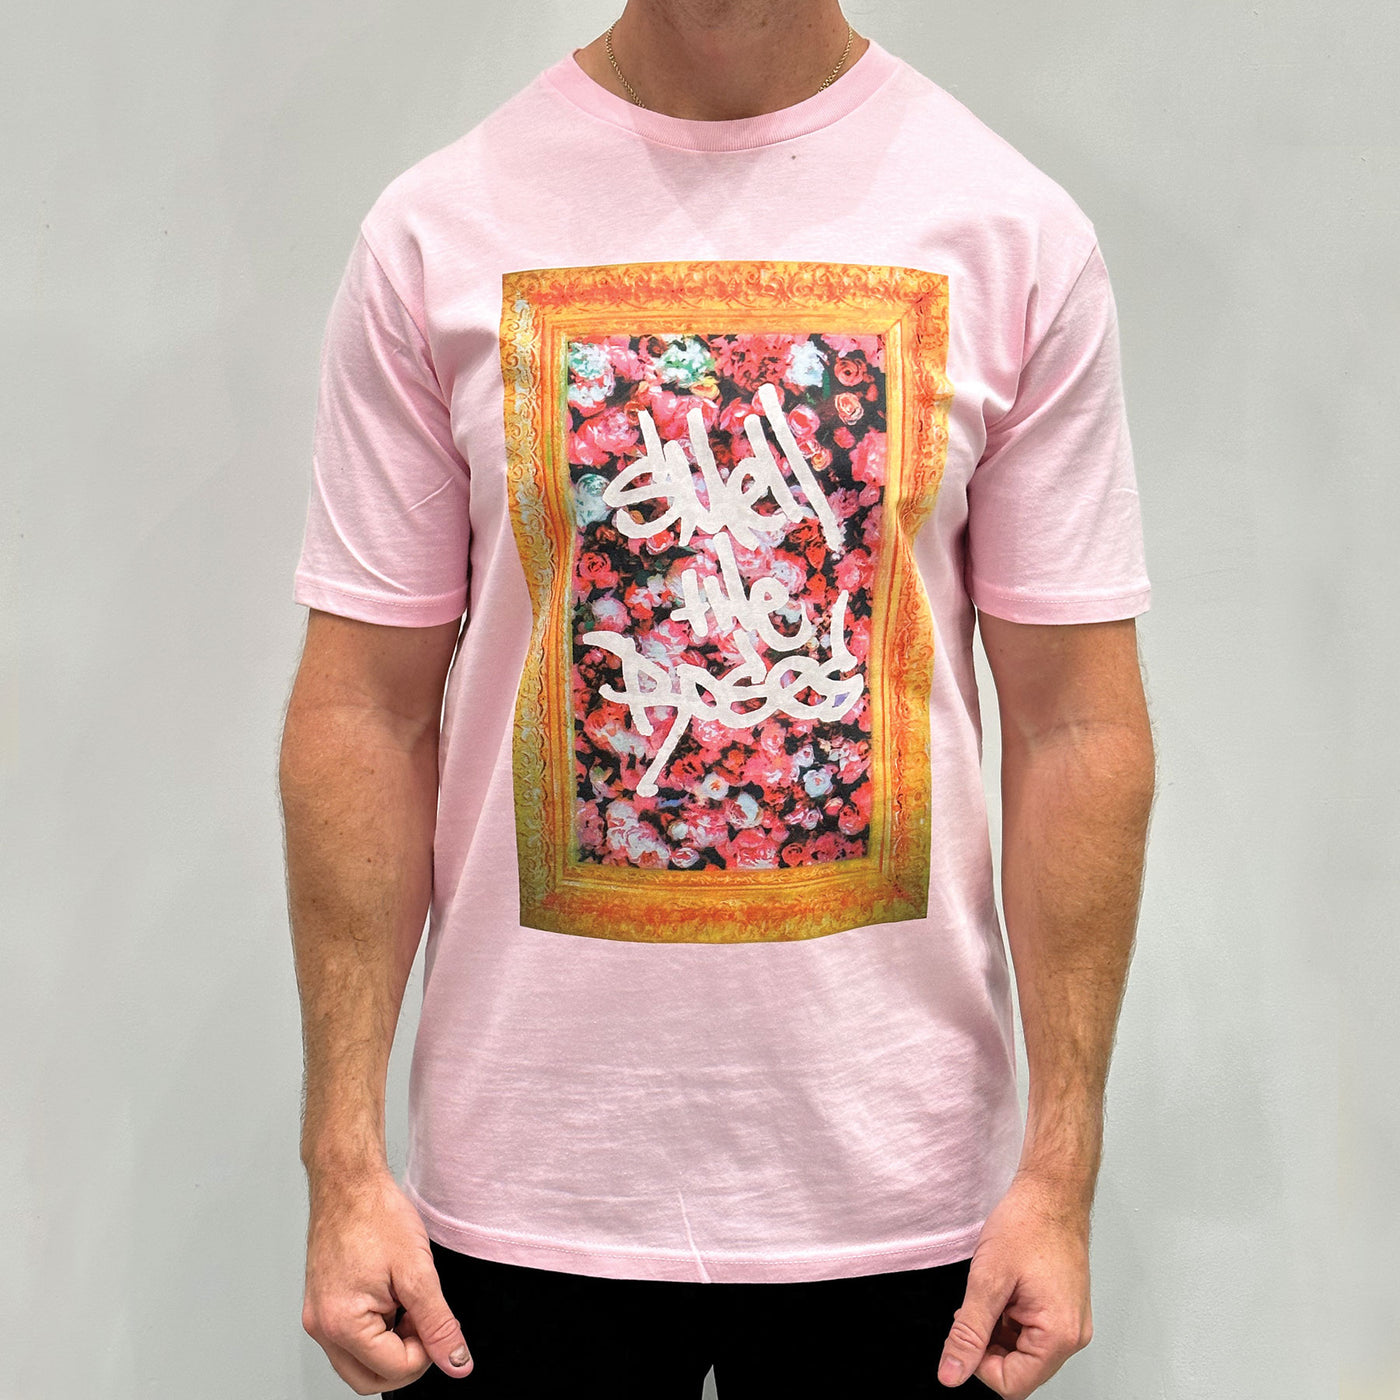 Smell the Roses T-Shirt